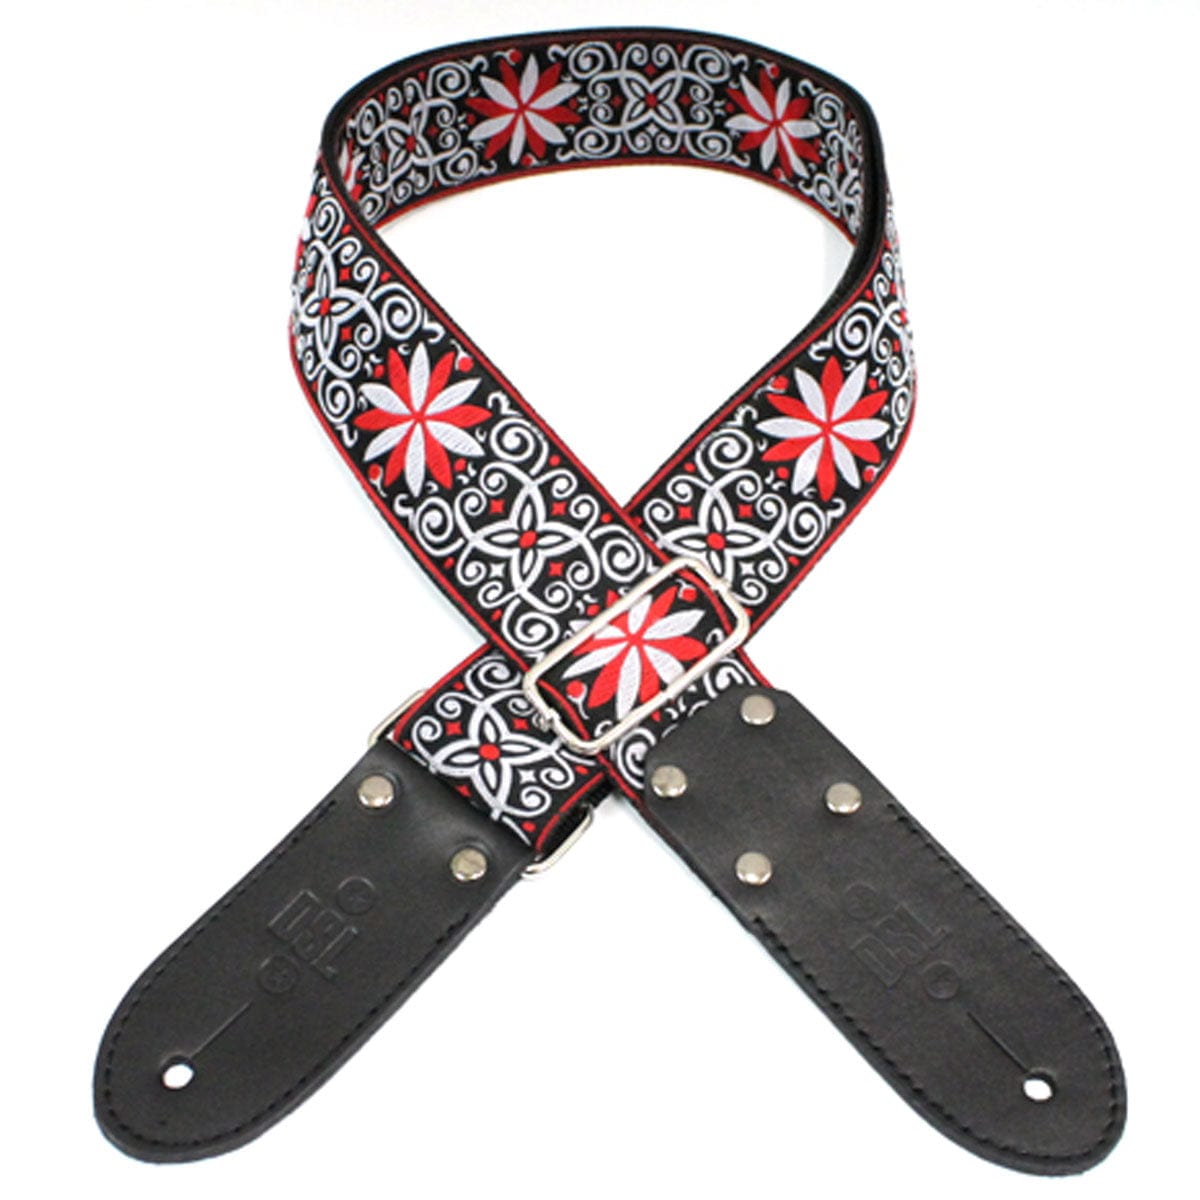 DSL Guitar Accessories DSL 2 Inch Guitar Strap Jacquard - Red Angel - Byron Music